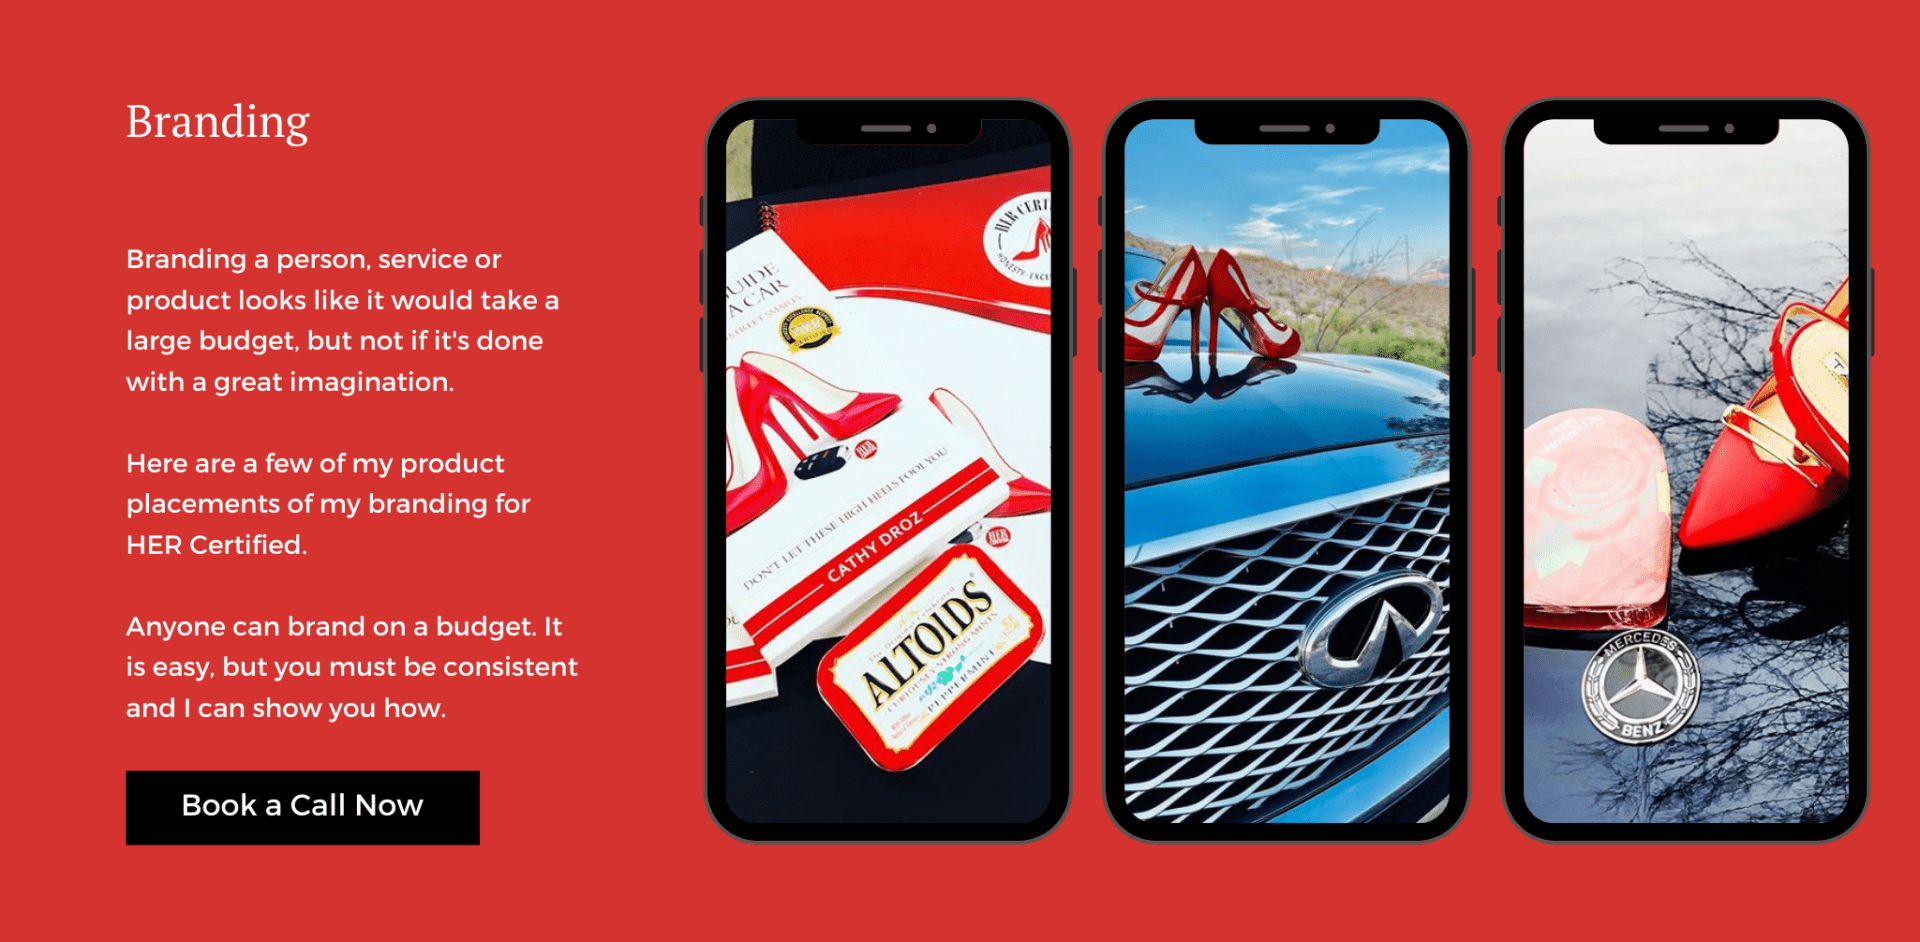 Two phones are shown side by side with a picture of an automobile.